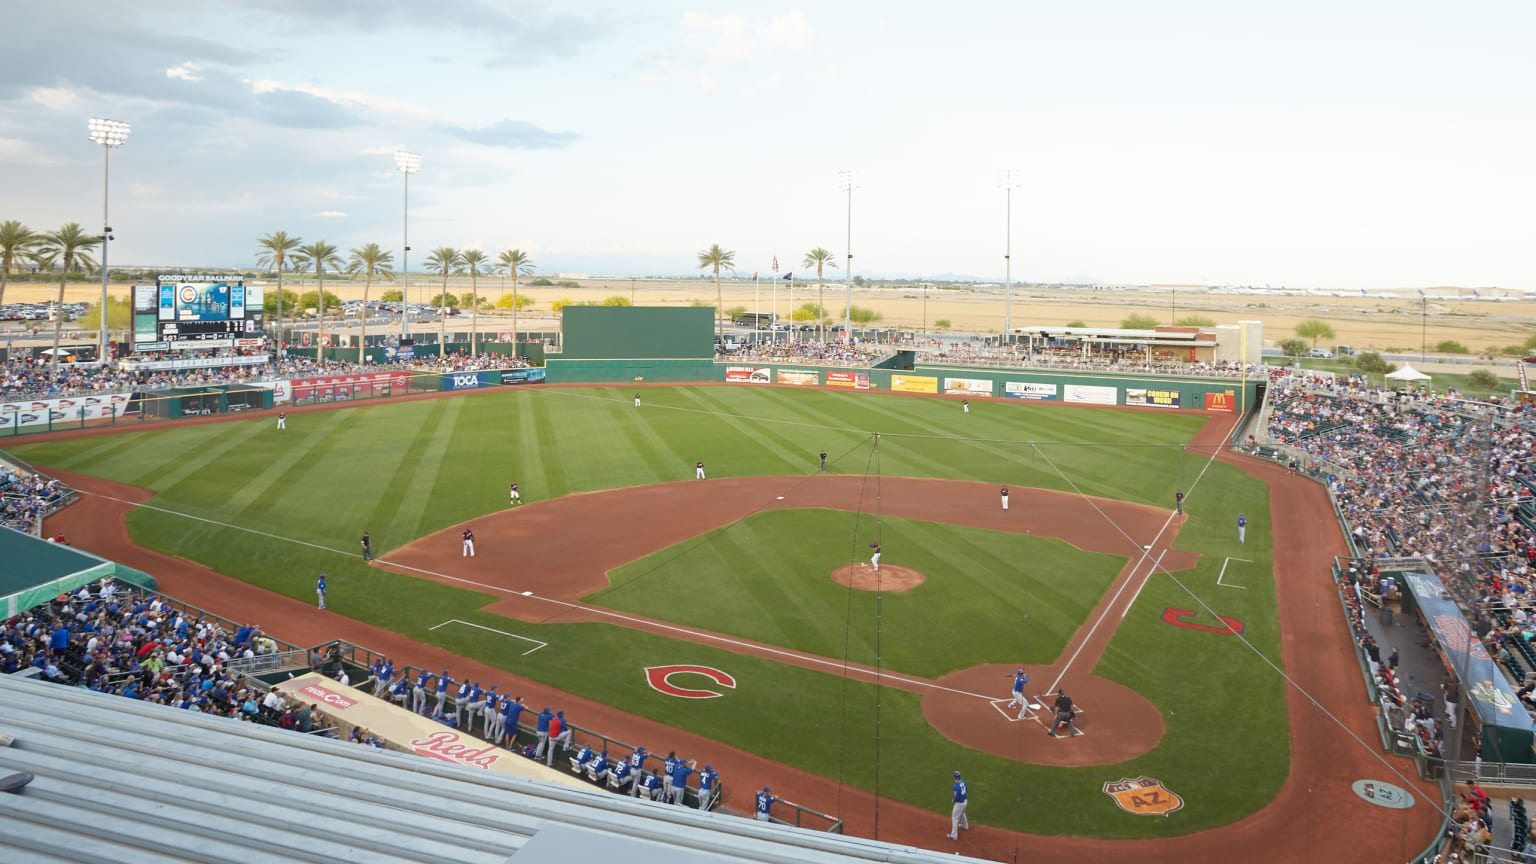 2023 SPRING TRAINING INDIVIDUAL GAME TICKETS TO GO ON SALE - In Play!  magazine